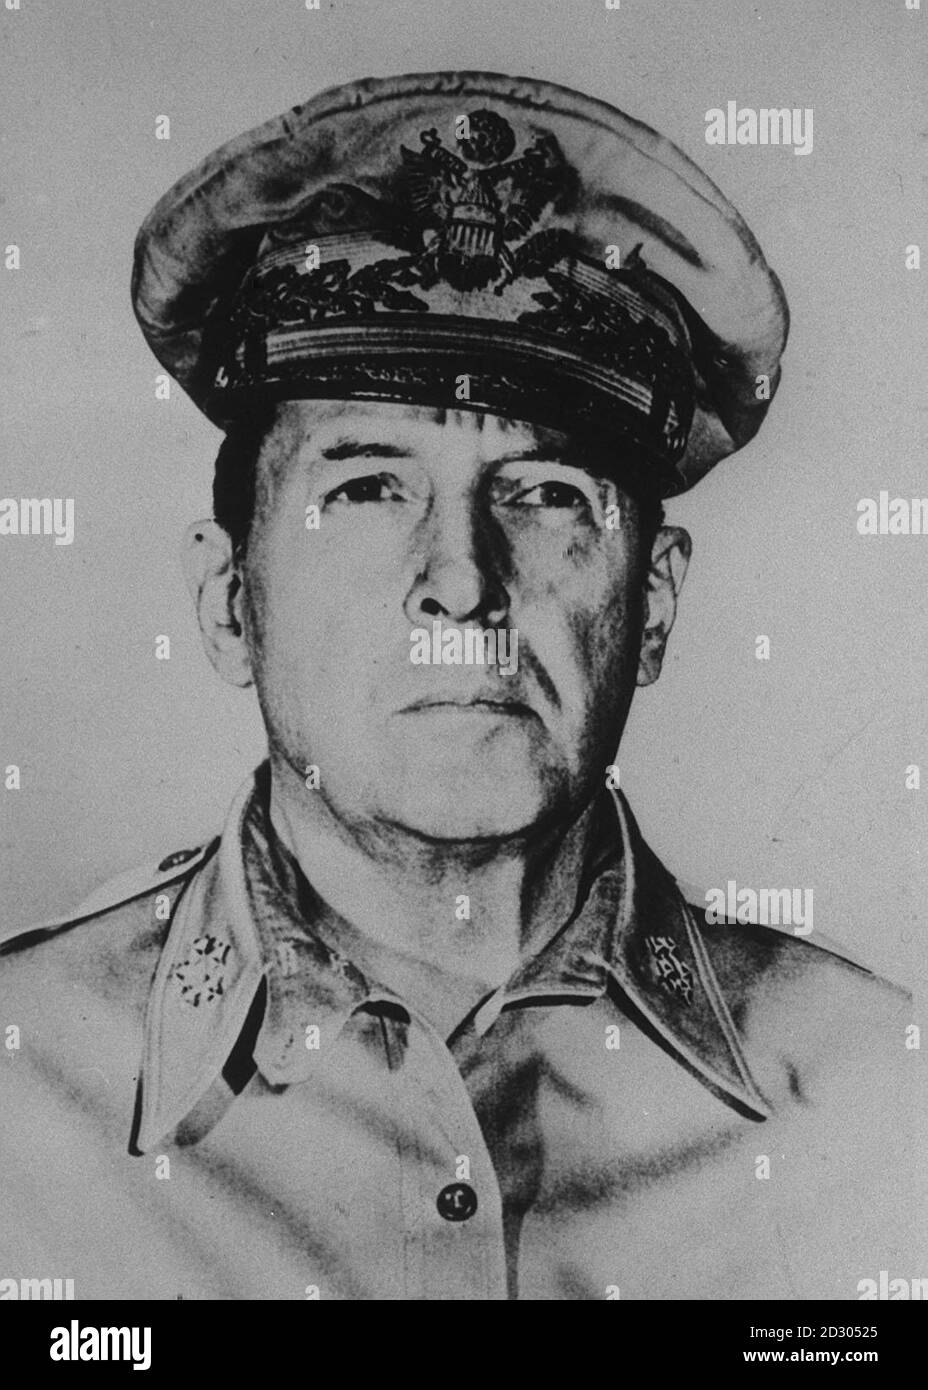 General Douglas MacArthur (1880-1964). Became commanding general of the US armed forces in the Pacific during World War II (1944) and accepted the surrender of Japan, the Allied occupation of which he commanded (1945-51).  * He was commander in chief of United Nations forces in Korea (1950-51) until he was dismissed by President Truman. Stock Photo